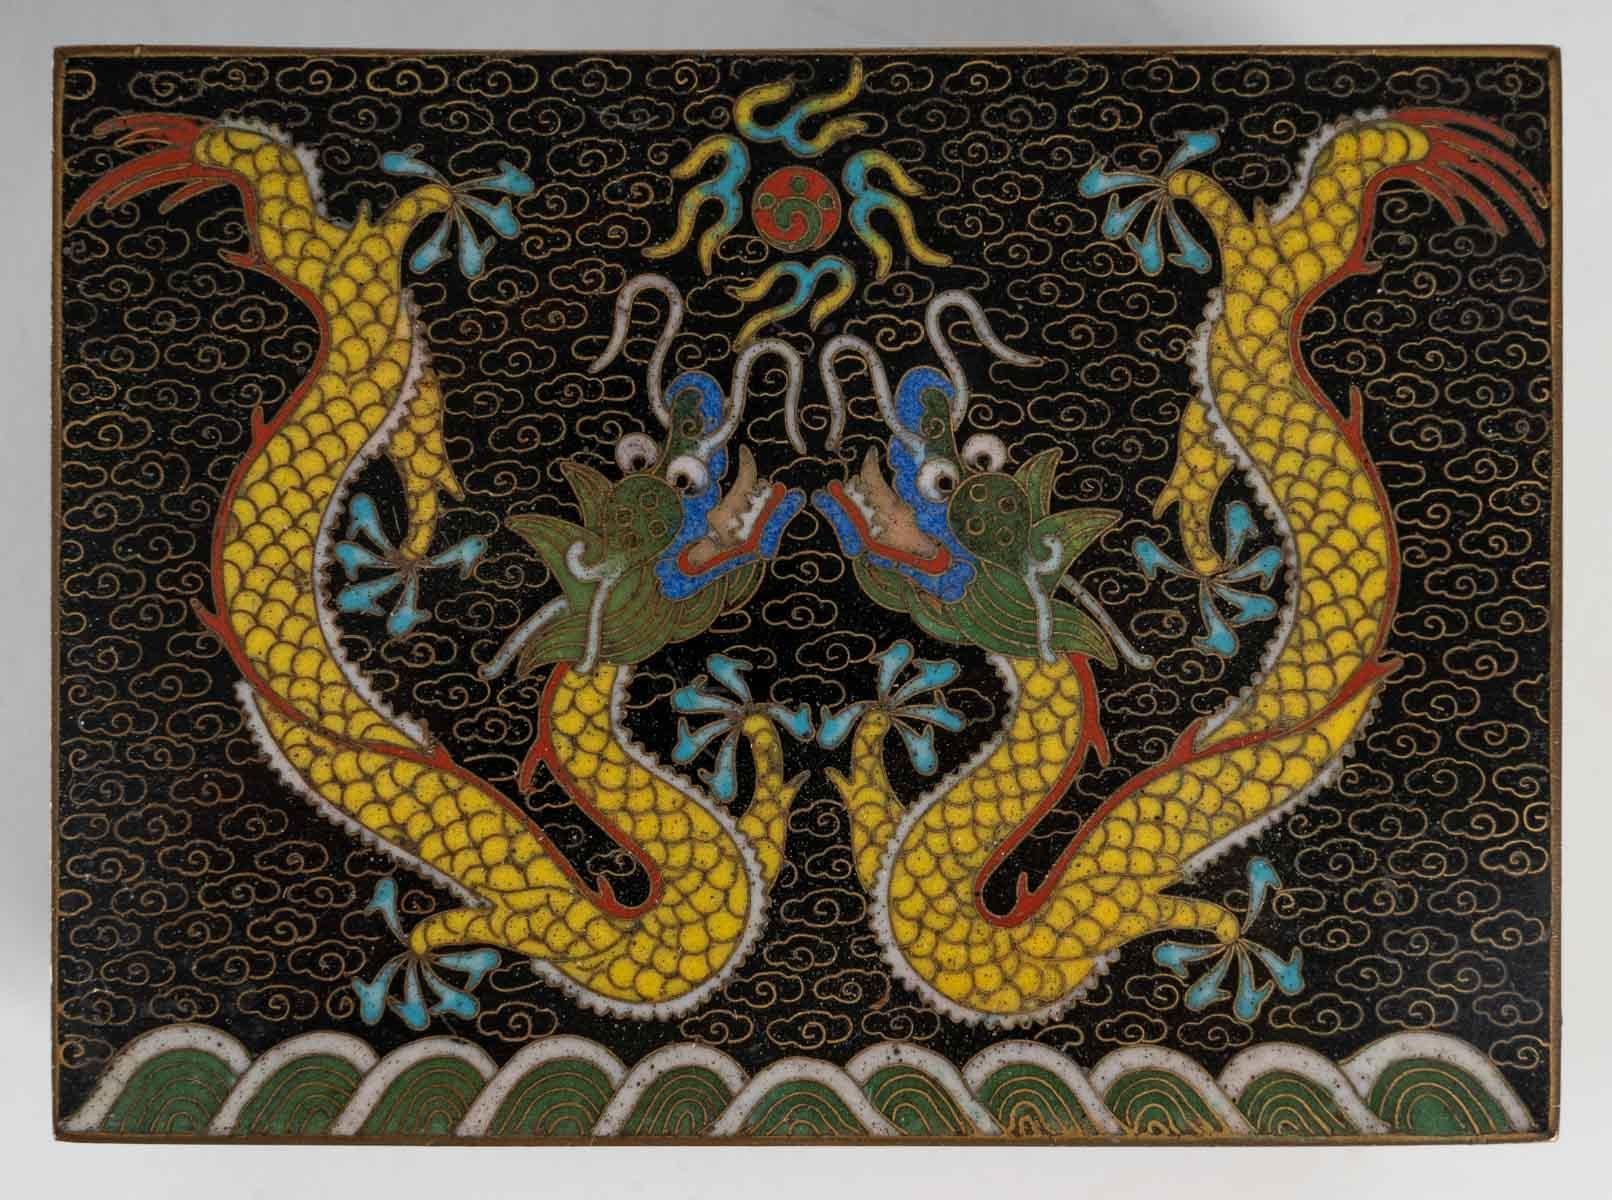 Metal box decorated with cloisonne enamels.

Two dragons facing each other around the pearl of wisdom. 

Turquoise blue enamelled interior.

China. Circa 1920.

Measures: H: 7.5 cm, W: 11.5 cm, D: 8.5 cm.